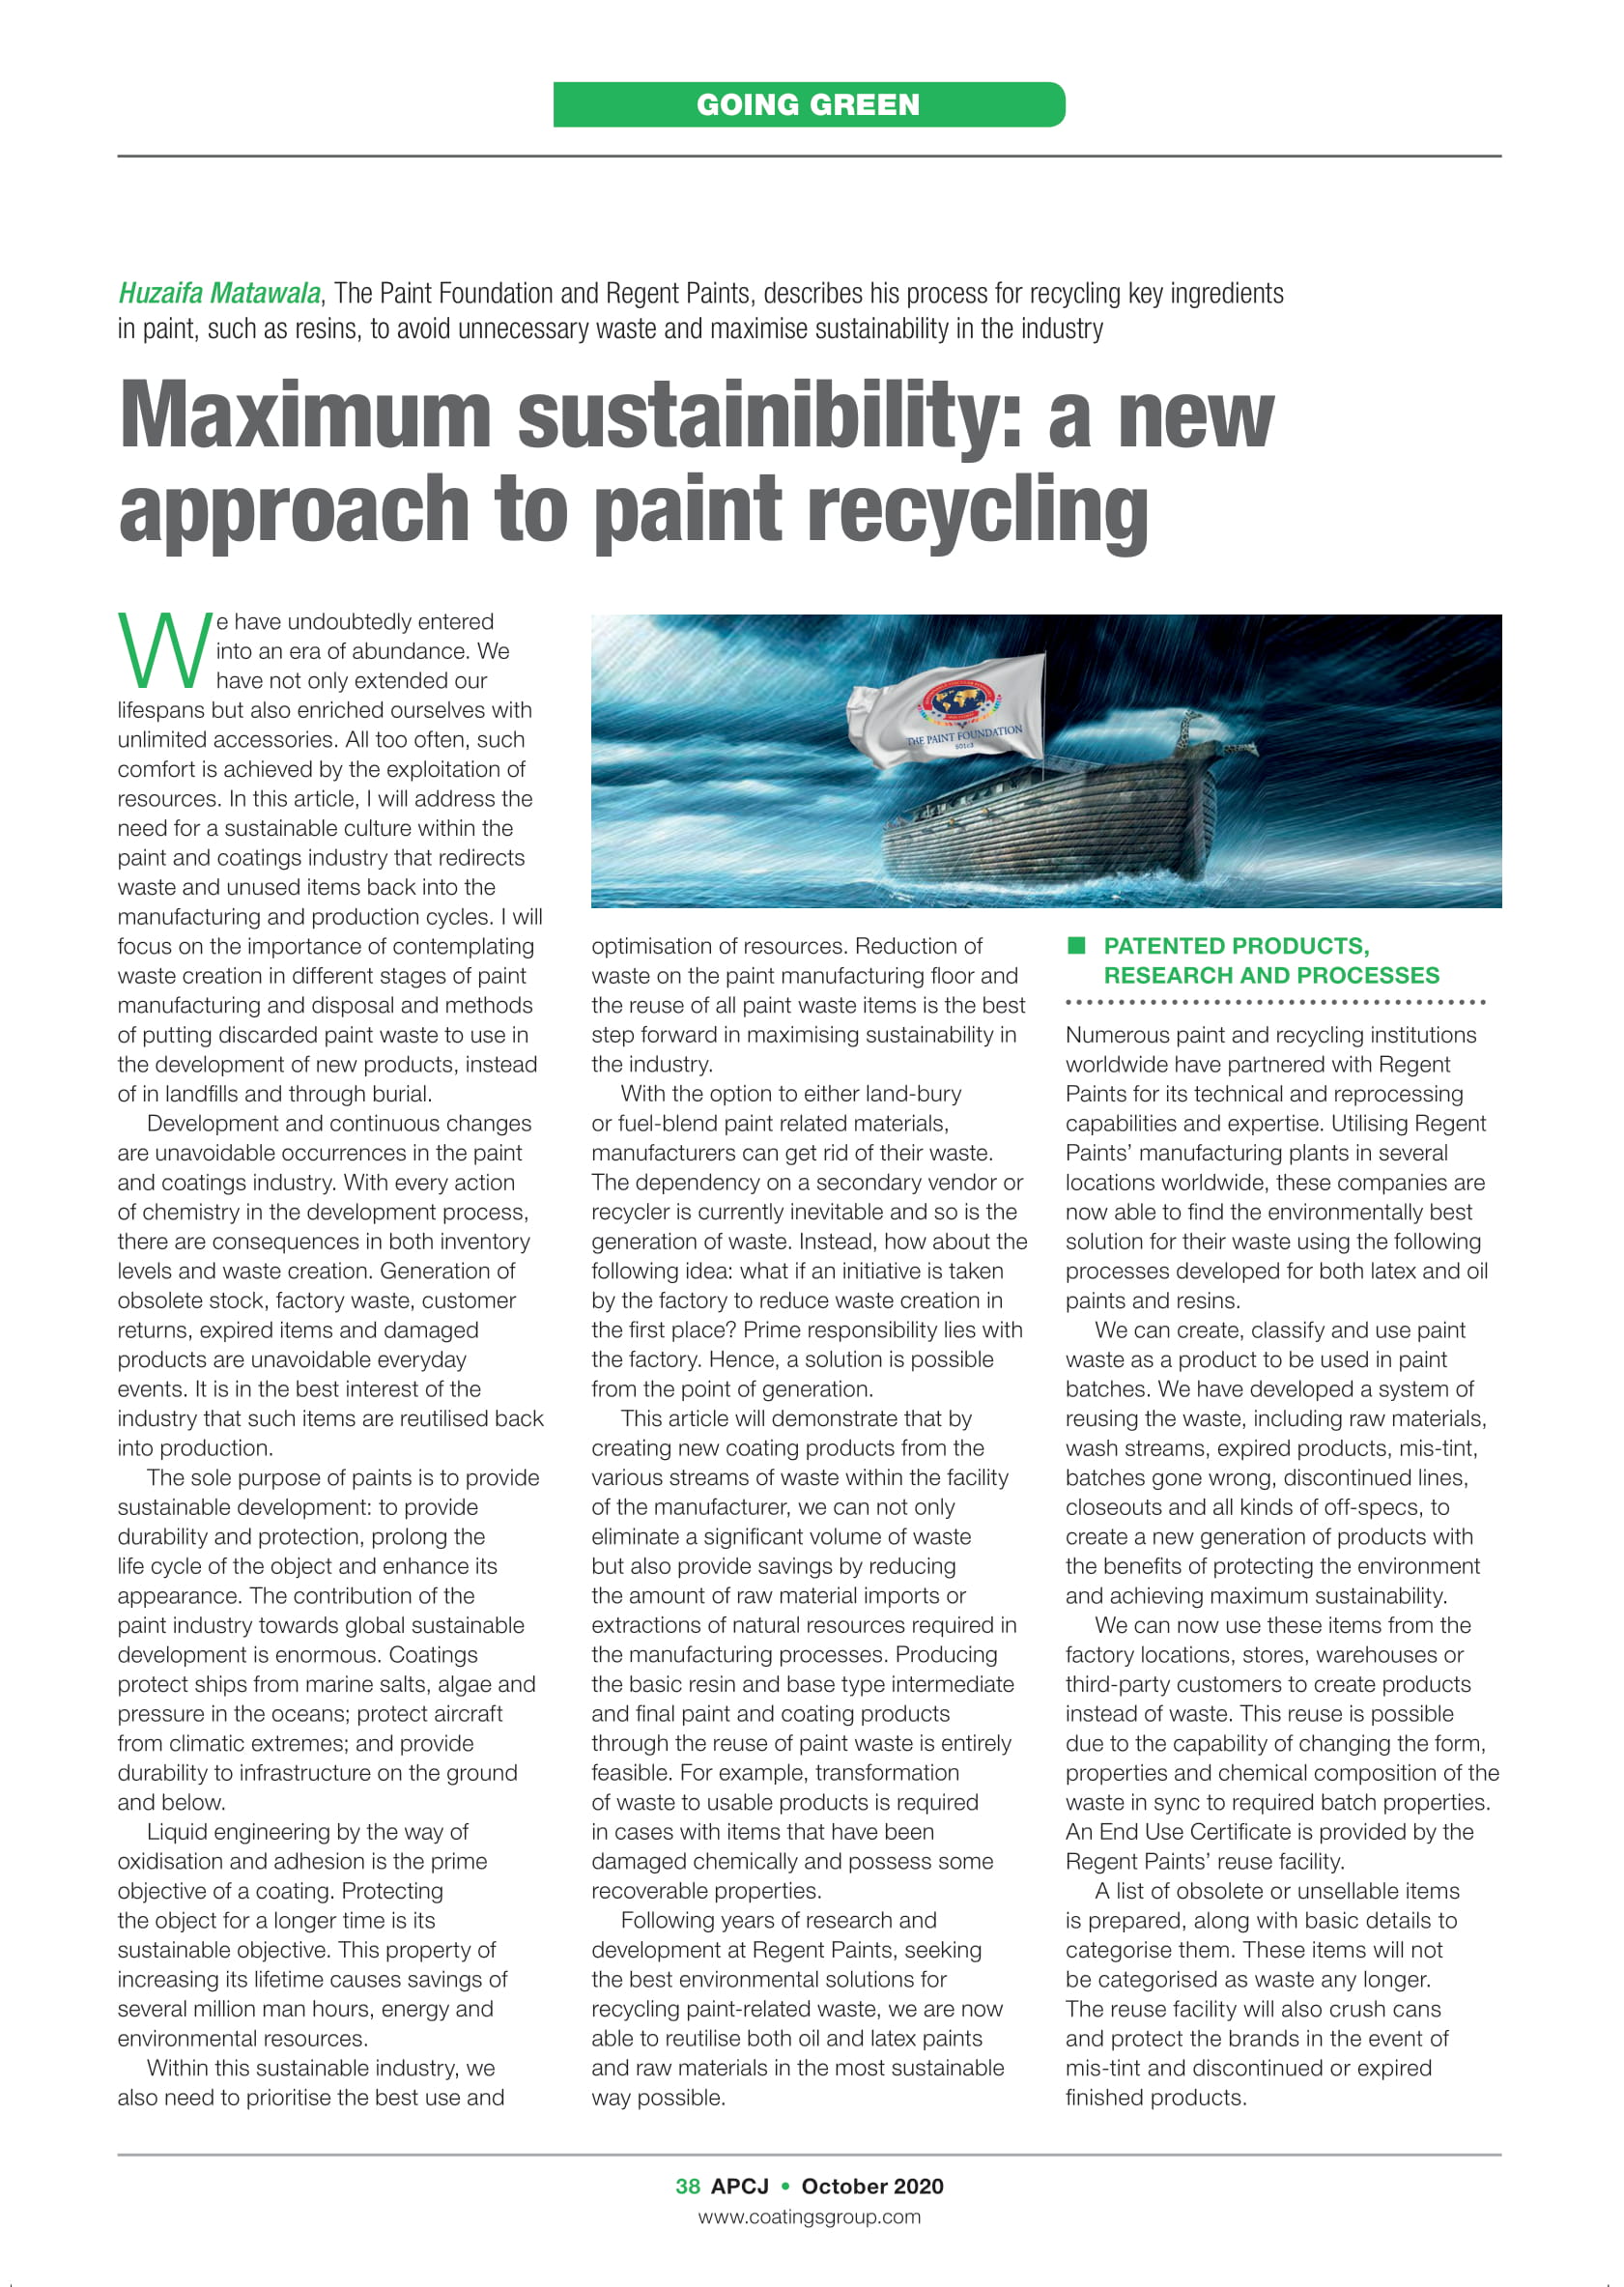 On Maximum sustainability - A new approach to Paint Recycling